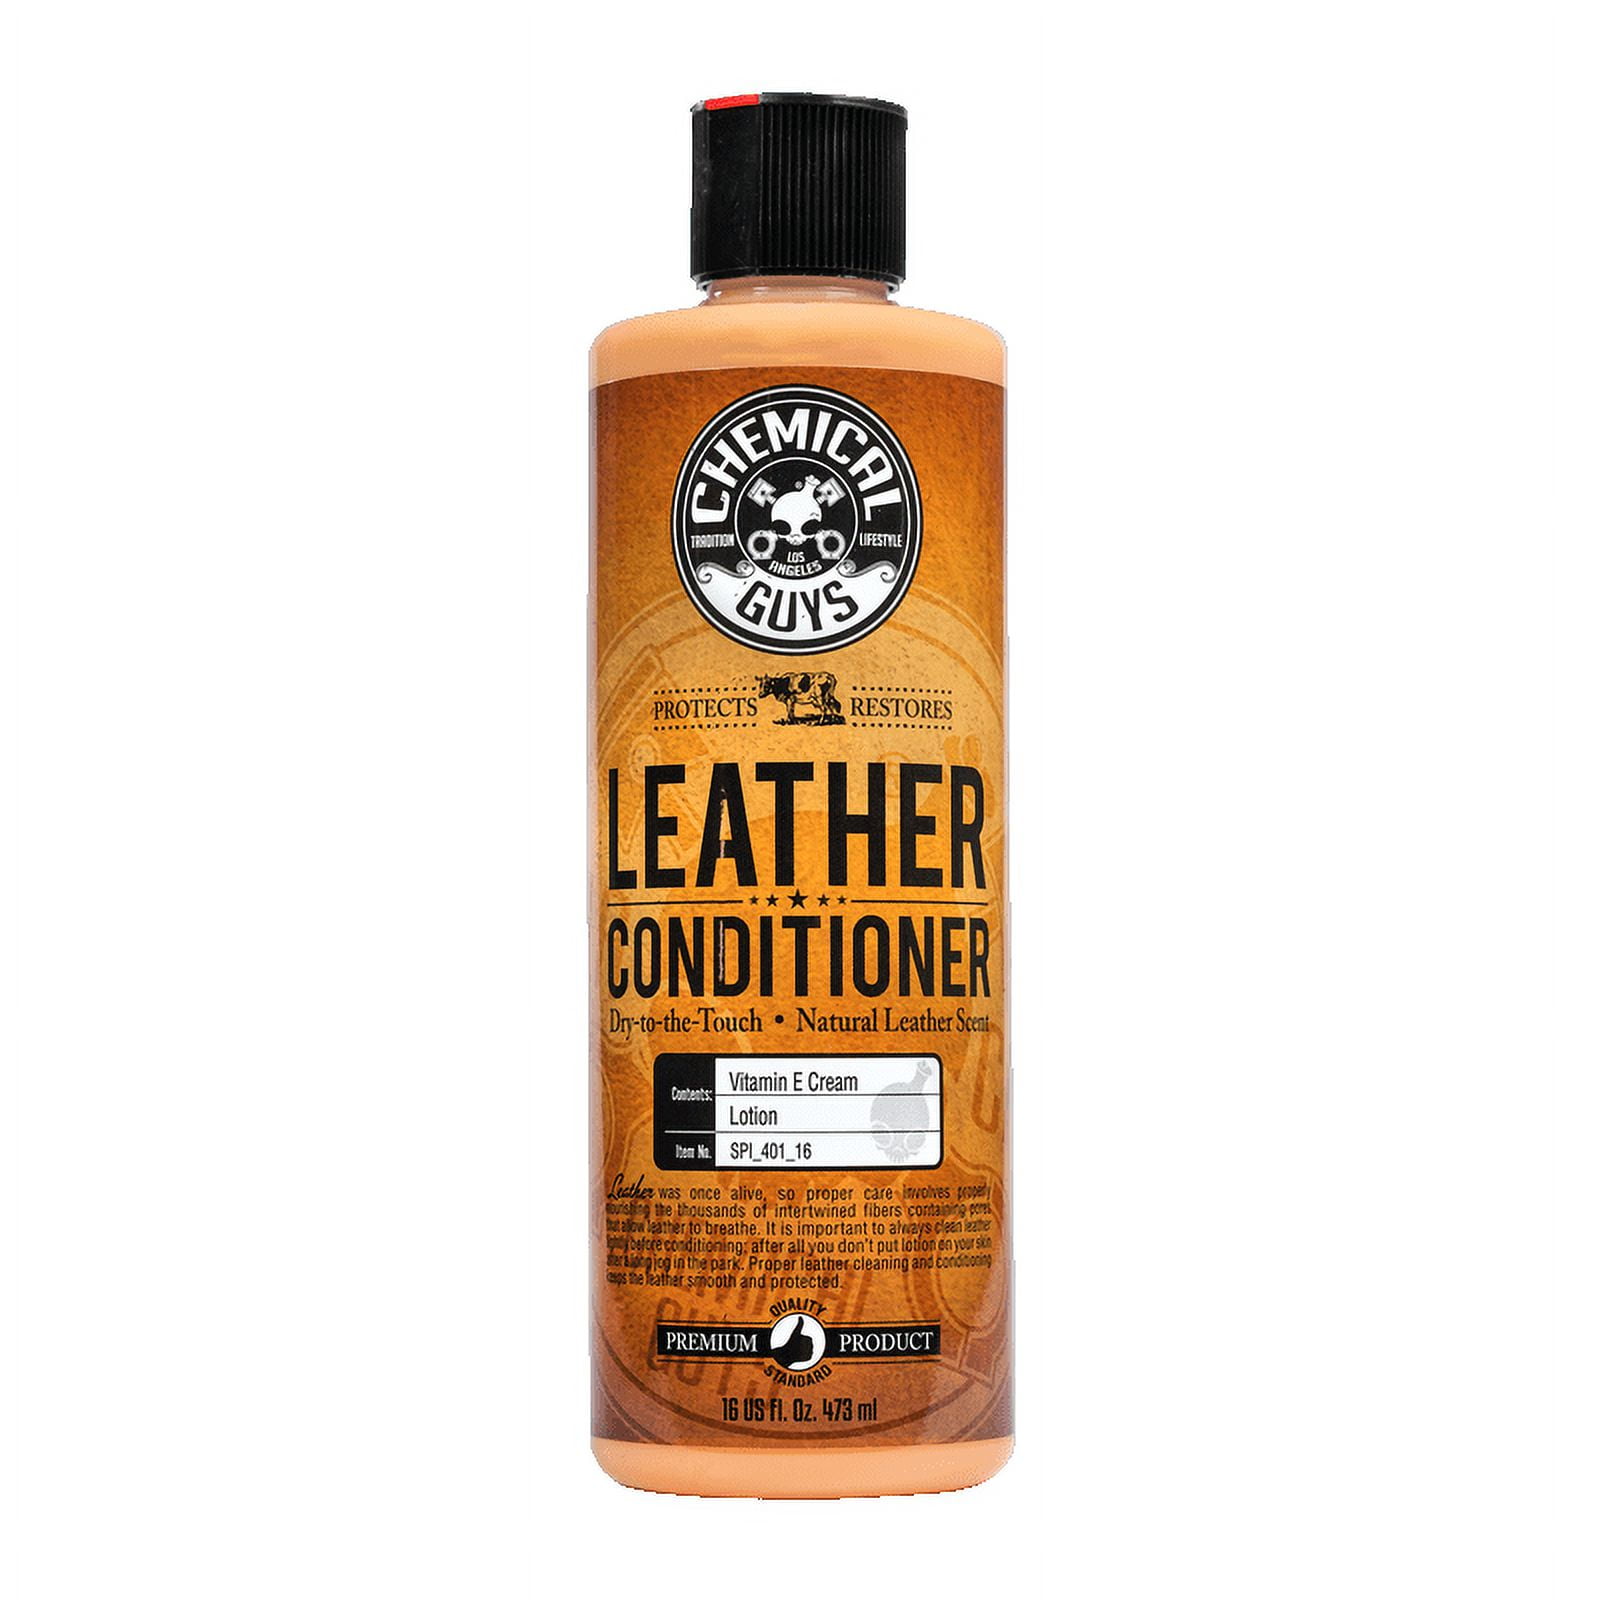 Give your leather the perfect 2 step combo with Leather Cleaner and Leather  Conditioner! Cleaning your leather every so often with Leather Cleaner, By Chemical Guys